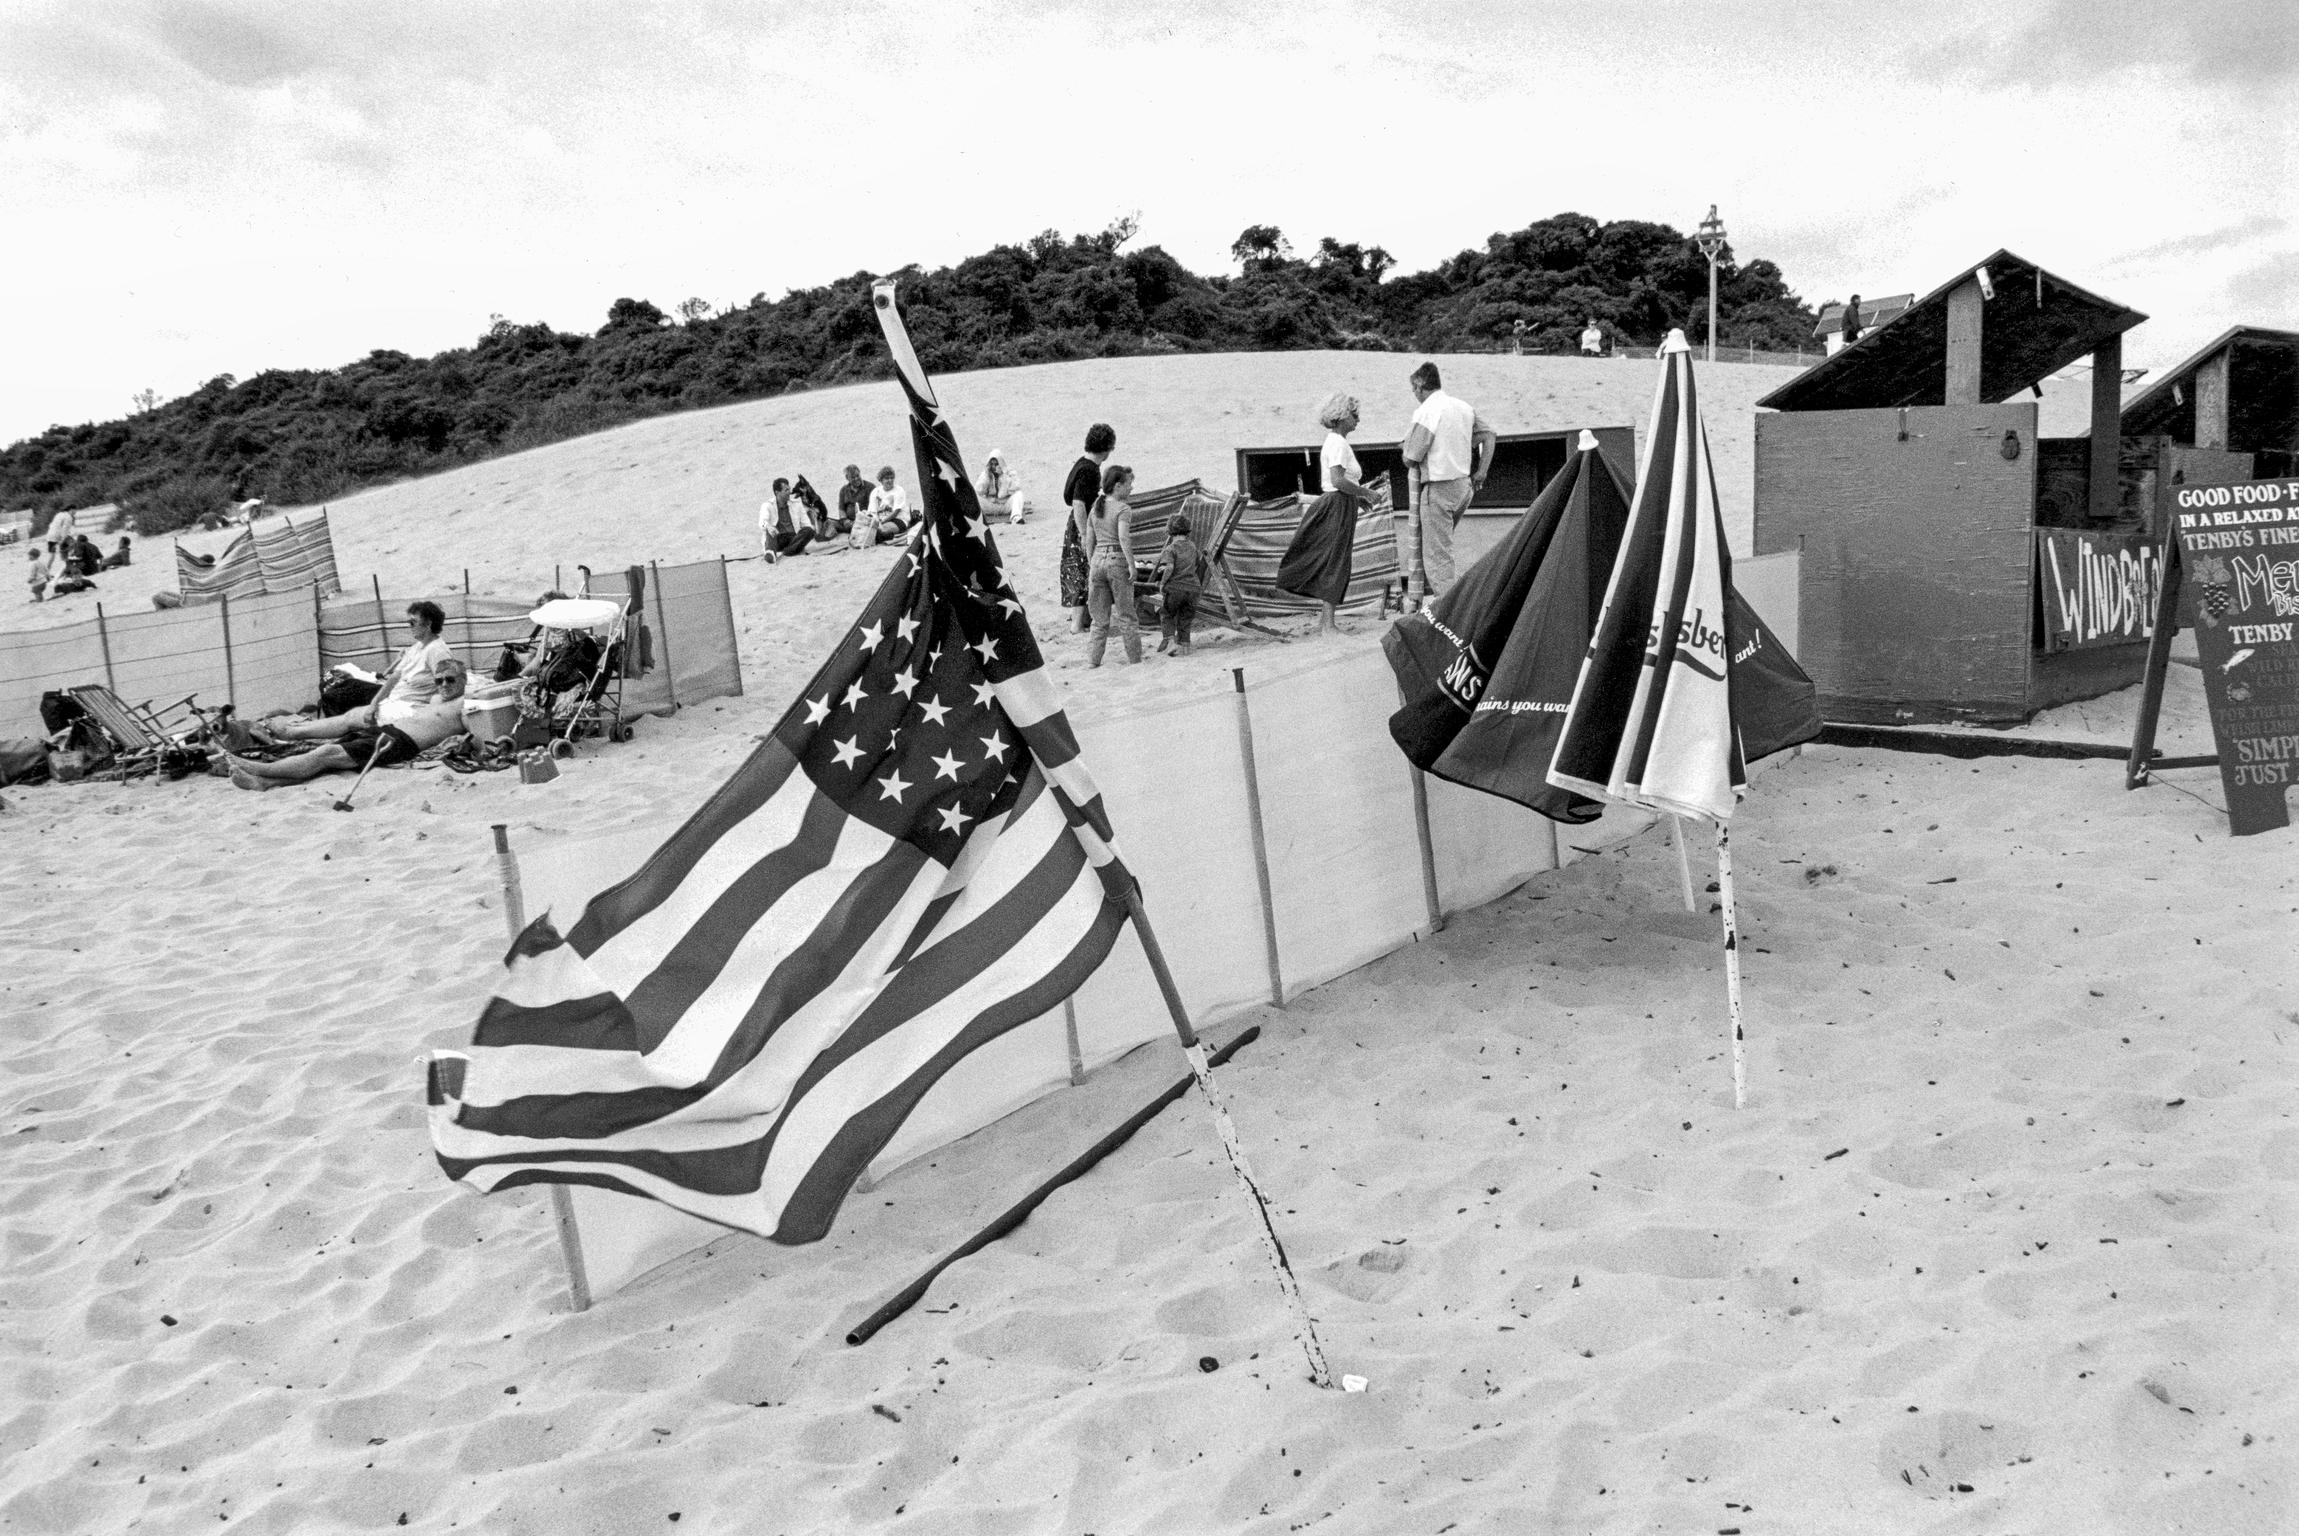 American flag on the beach. At a beach food stall. Tenby, Wales